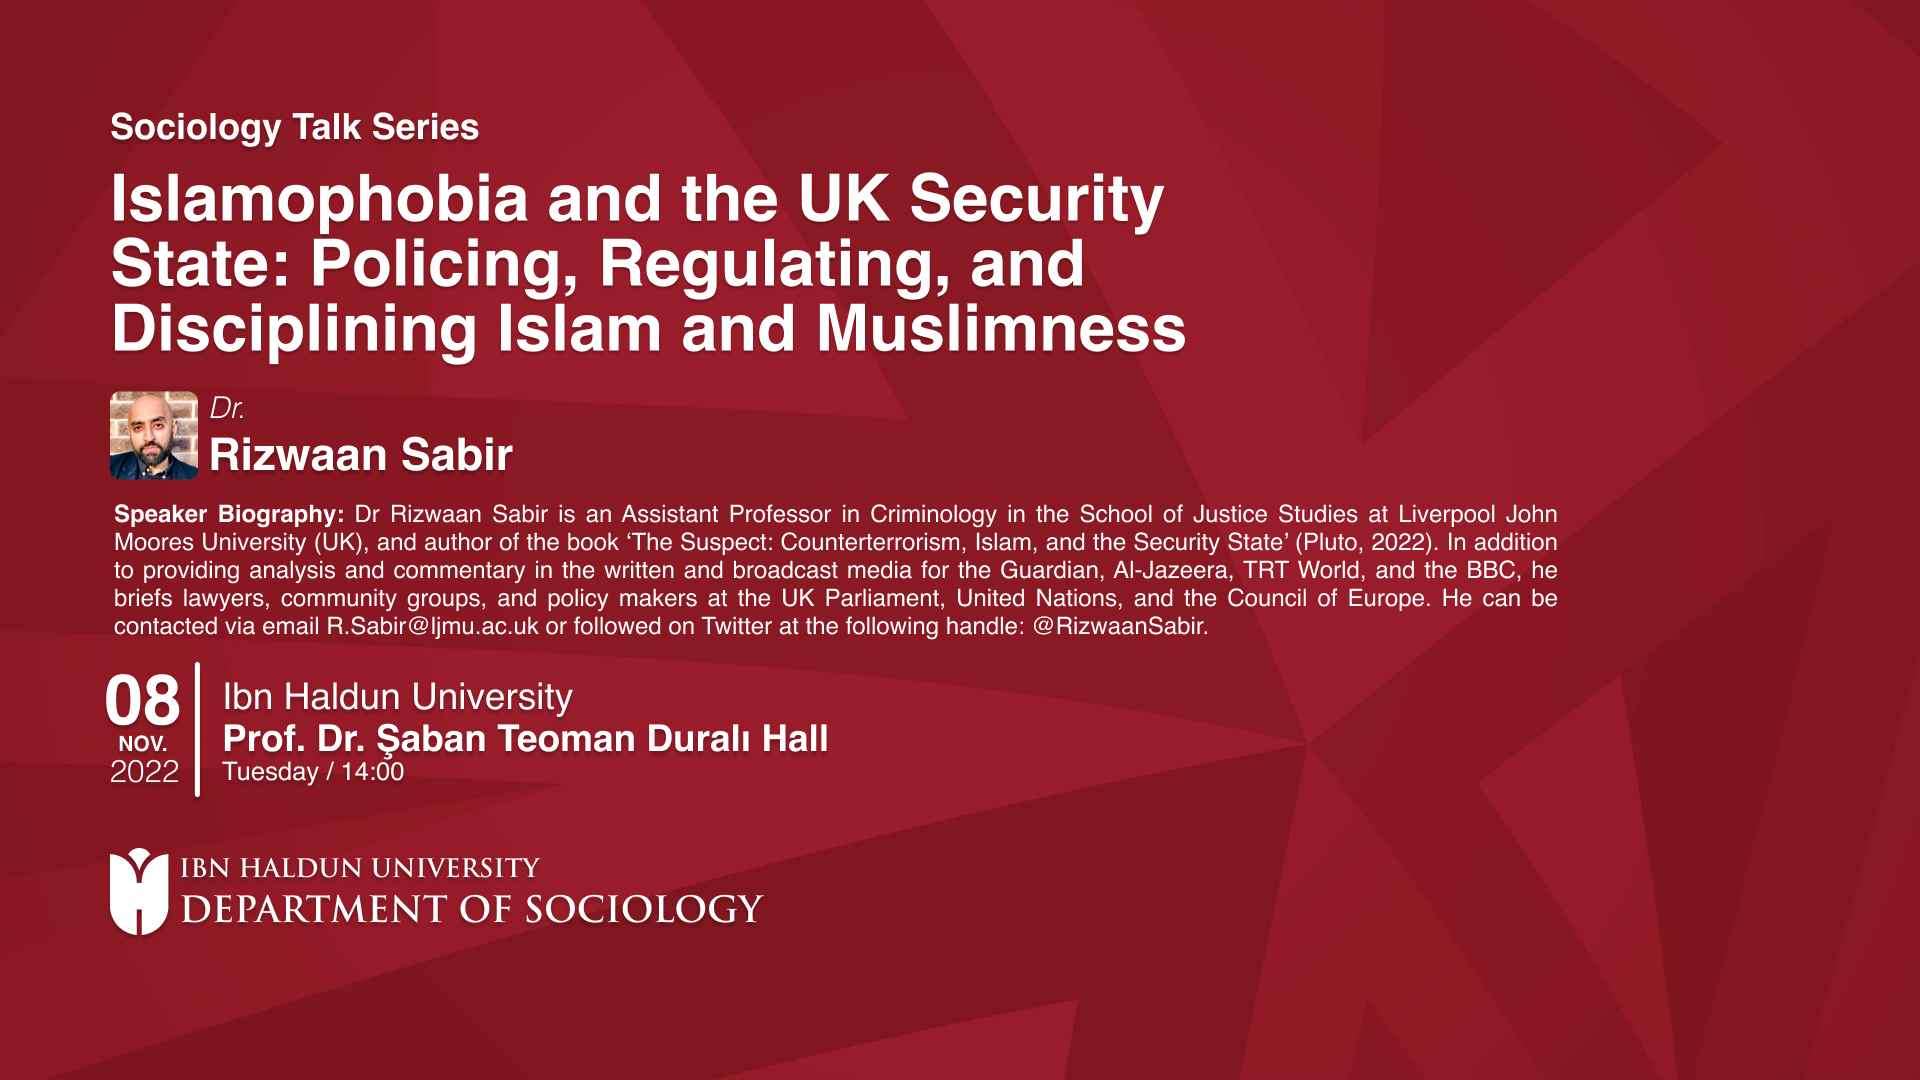 Sociology Talk Series - Islamophobia and the UK Security State: Policing, Regulating, and Disciplining Islam and Muslimness